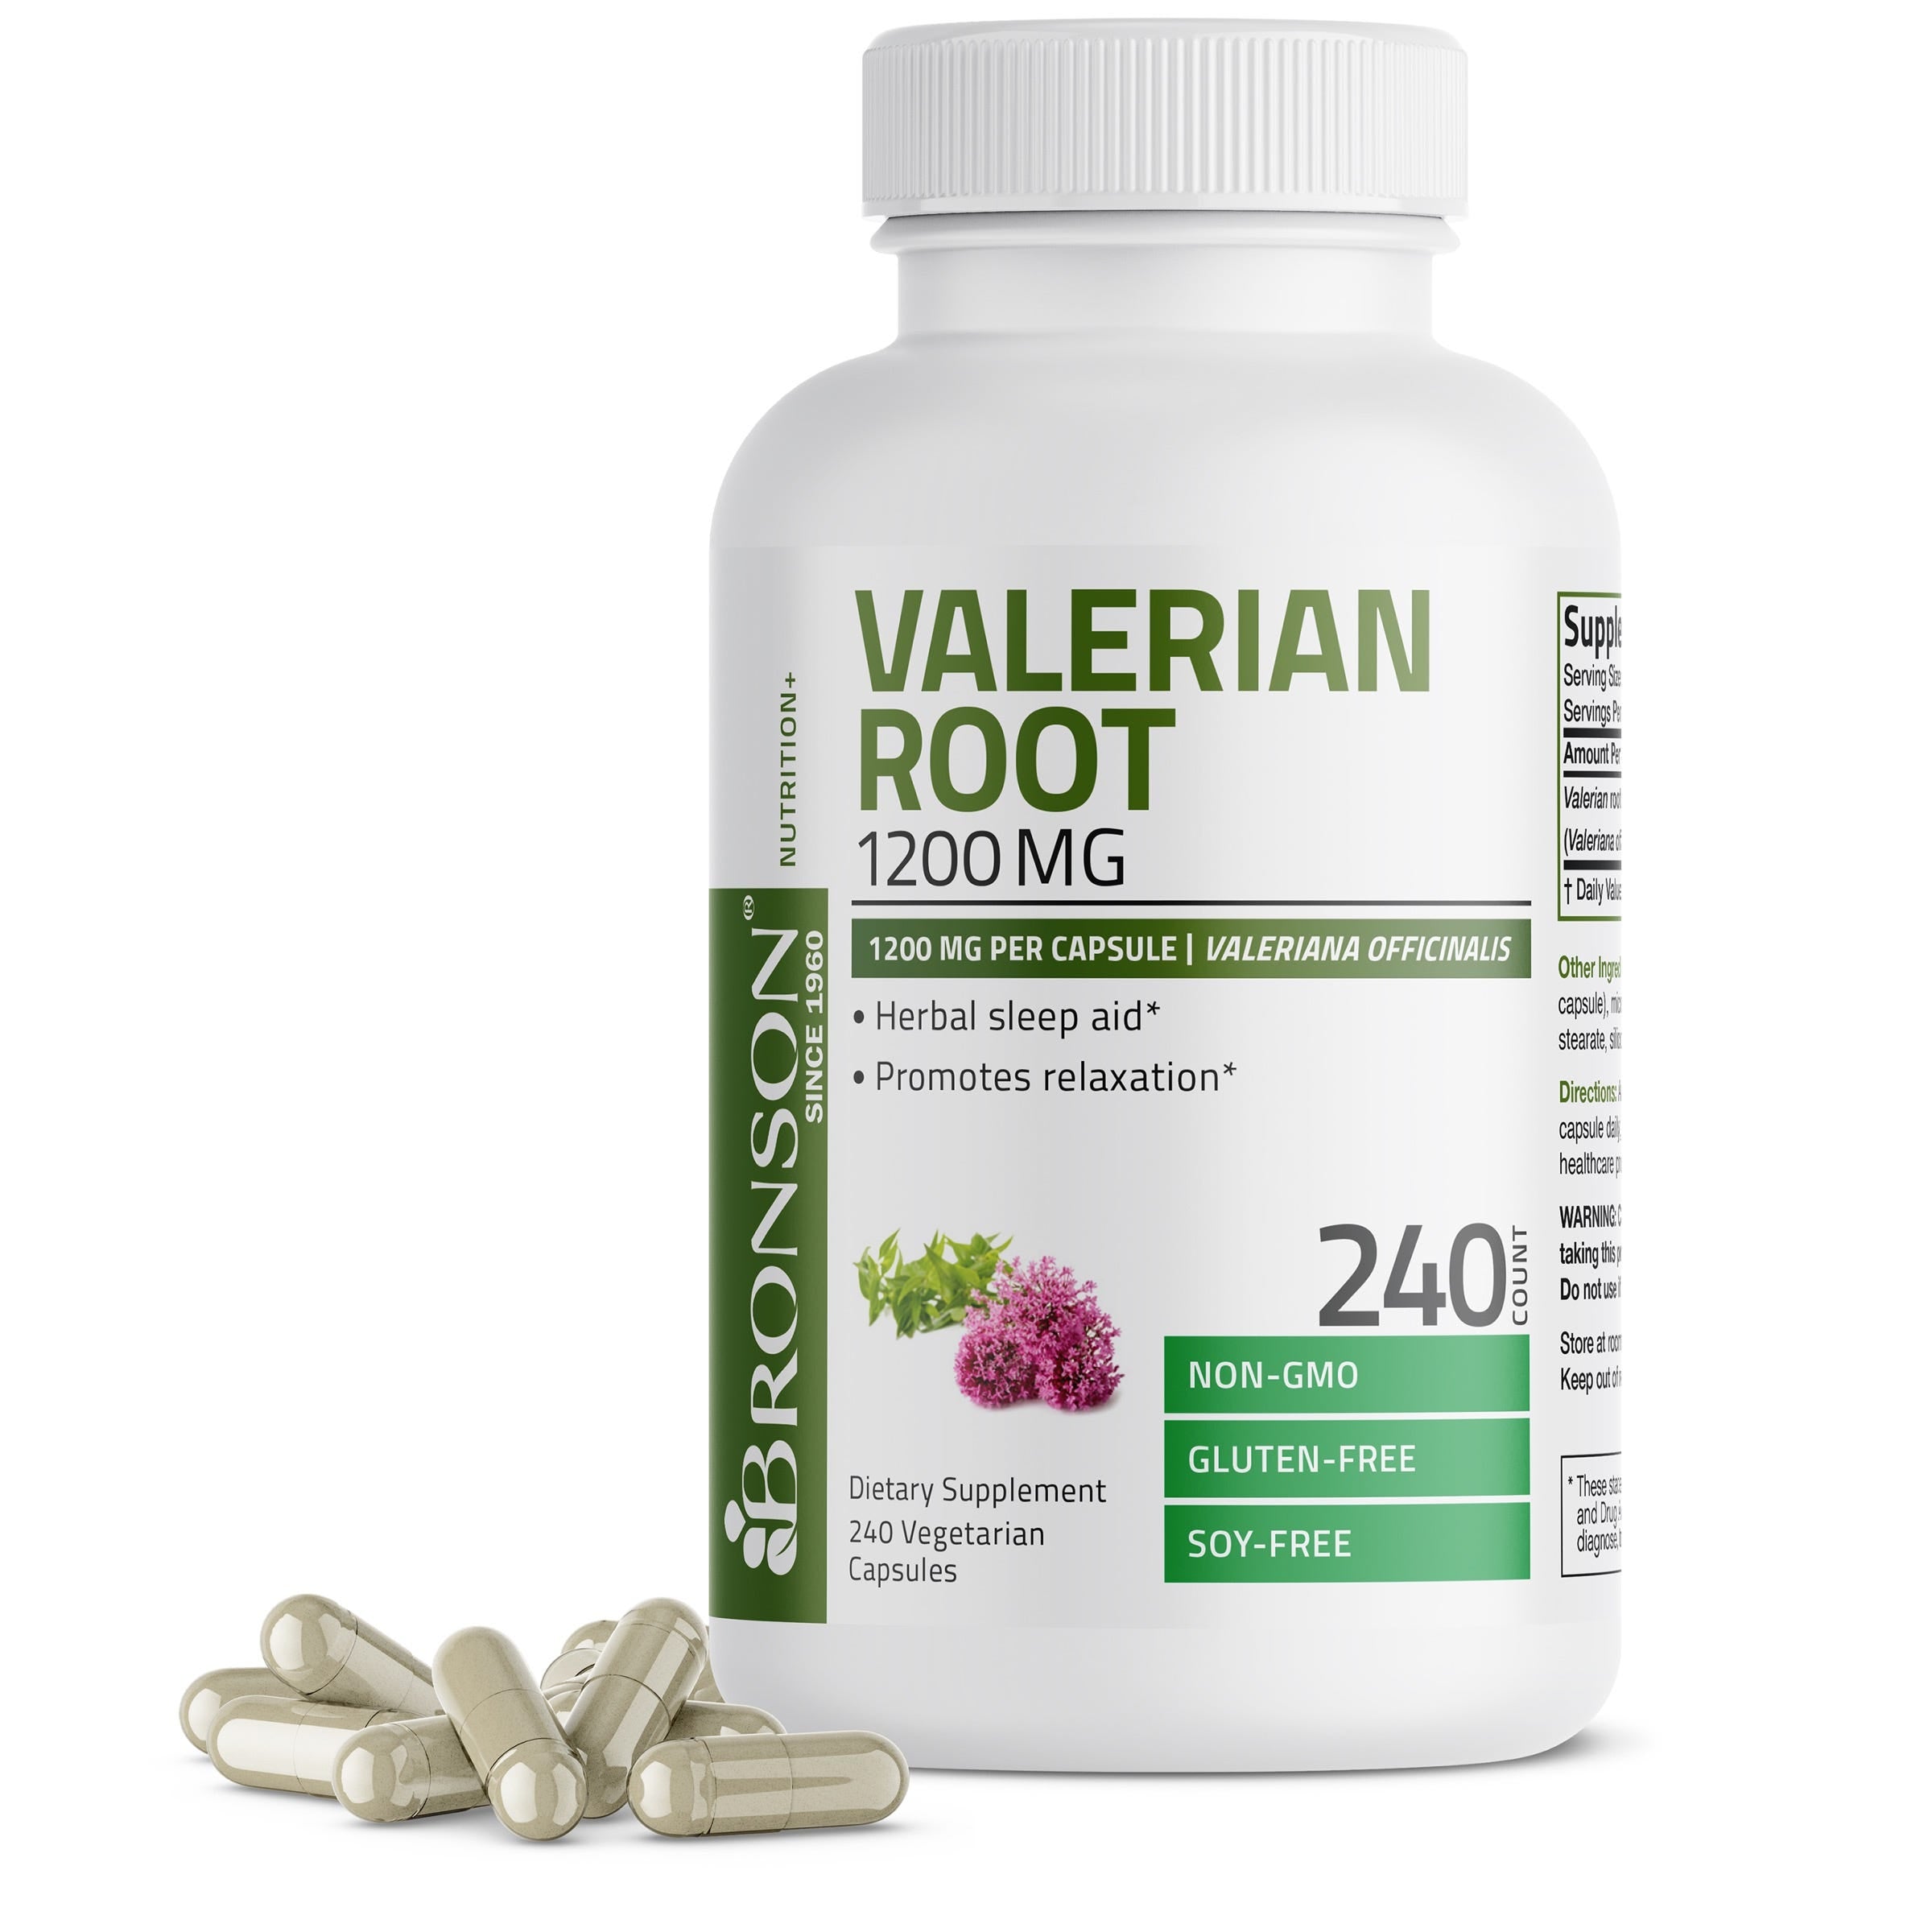 Valerian Root 1200 mg view 7 of 6